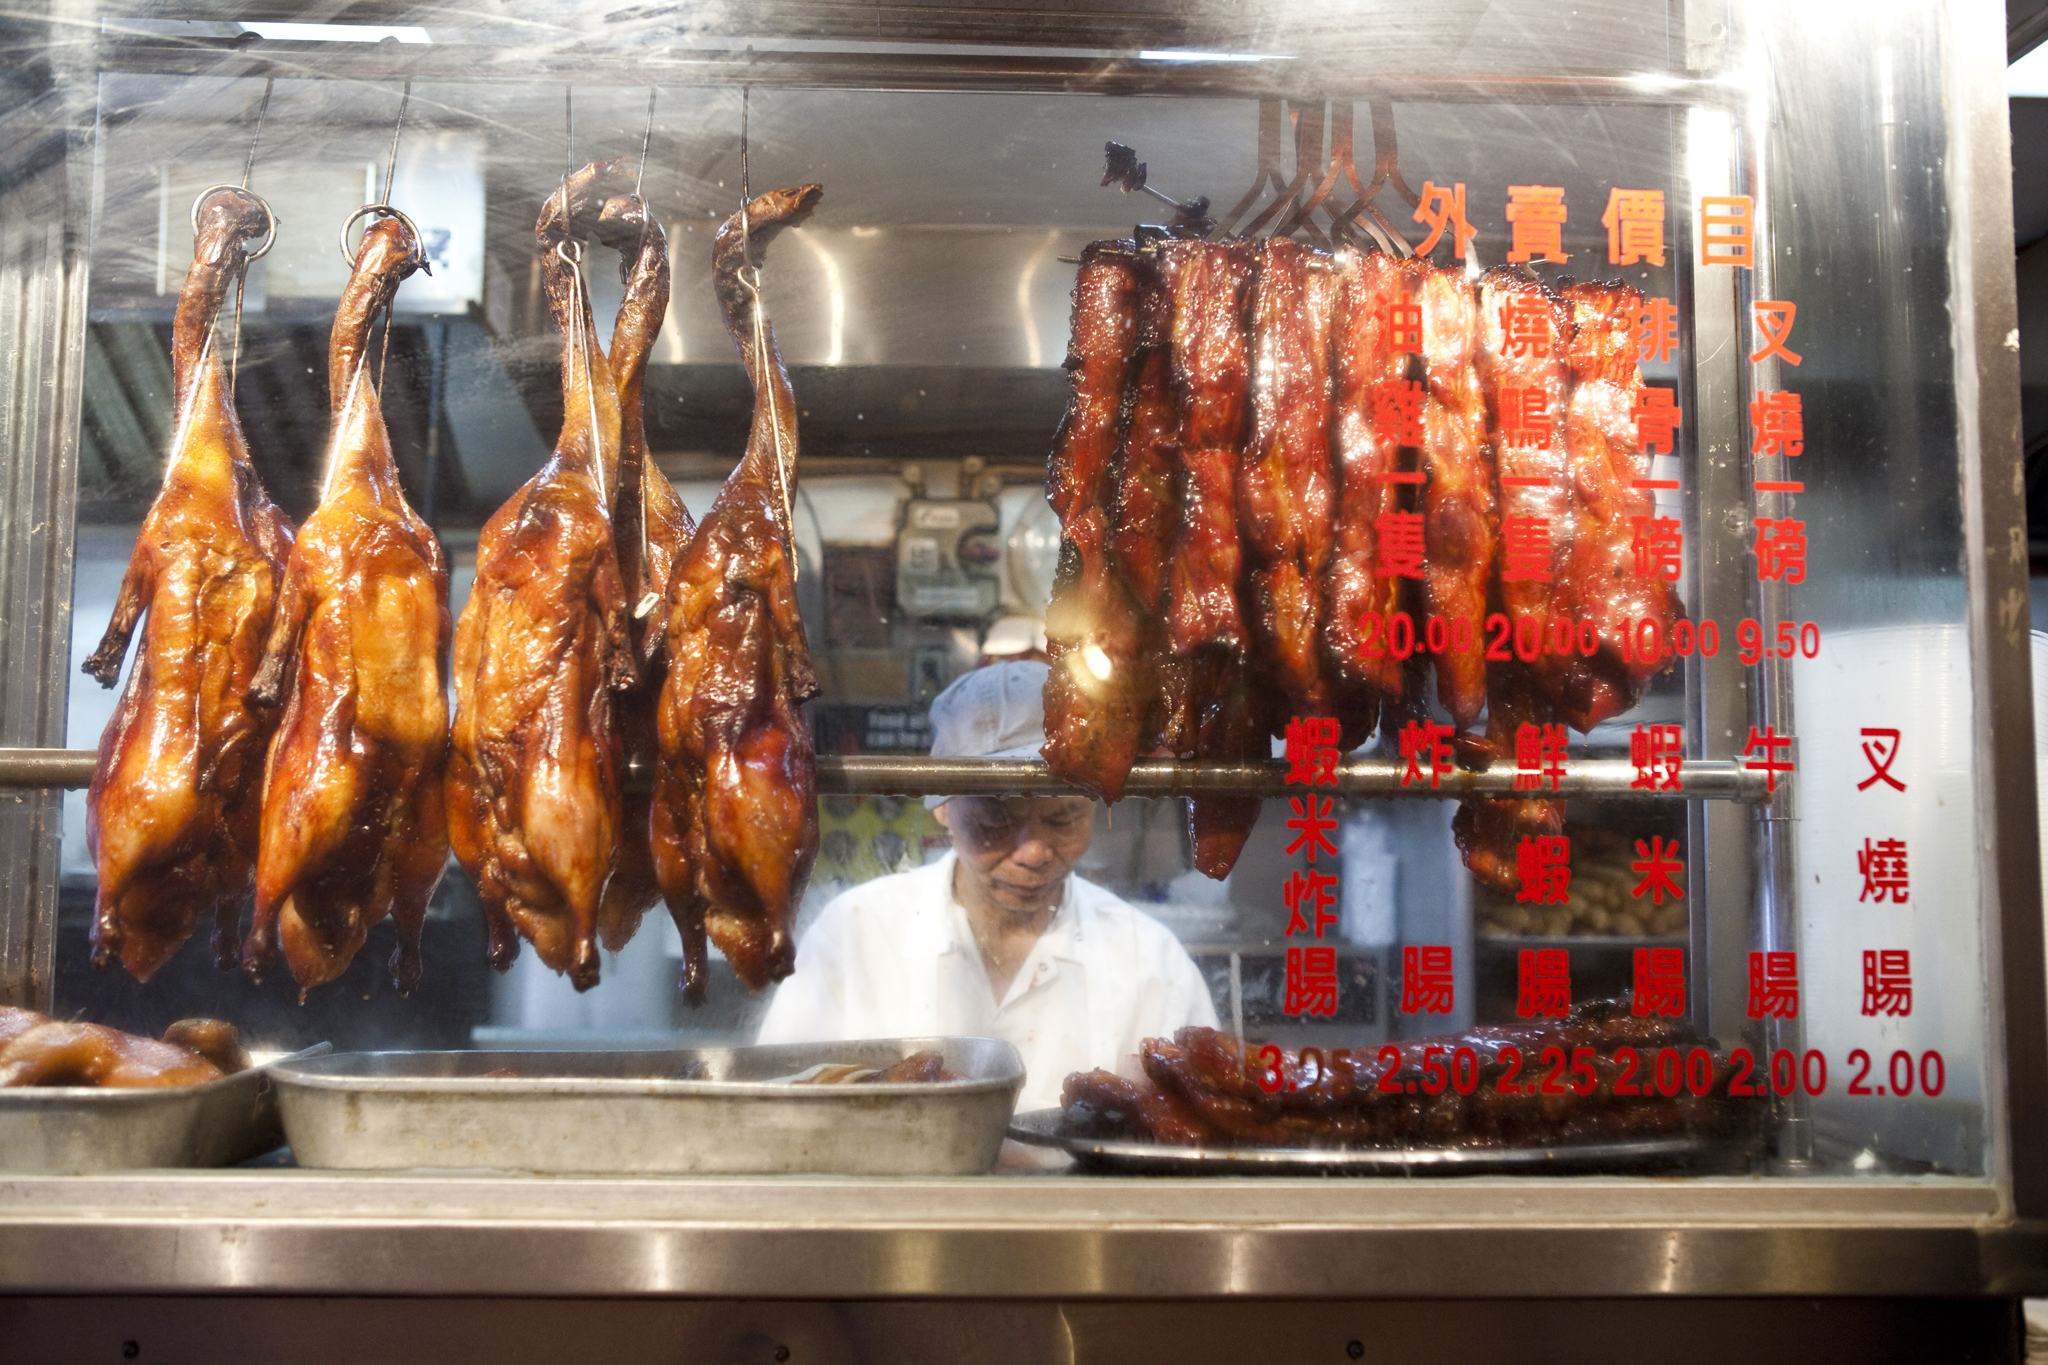 Essential Chinatown New York: A guide to the best basics